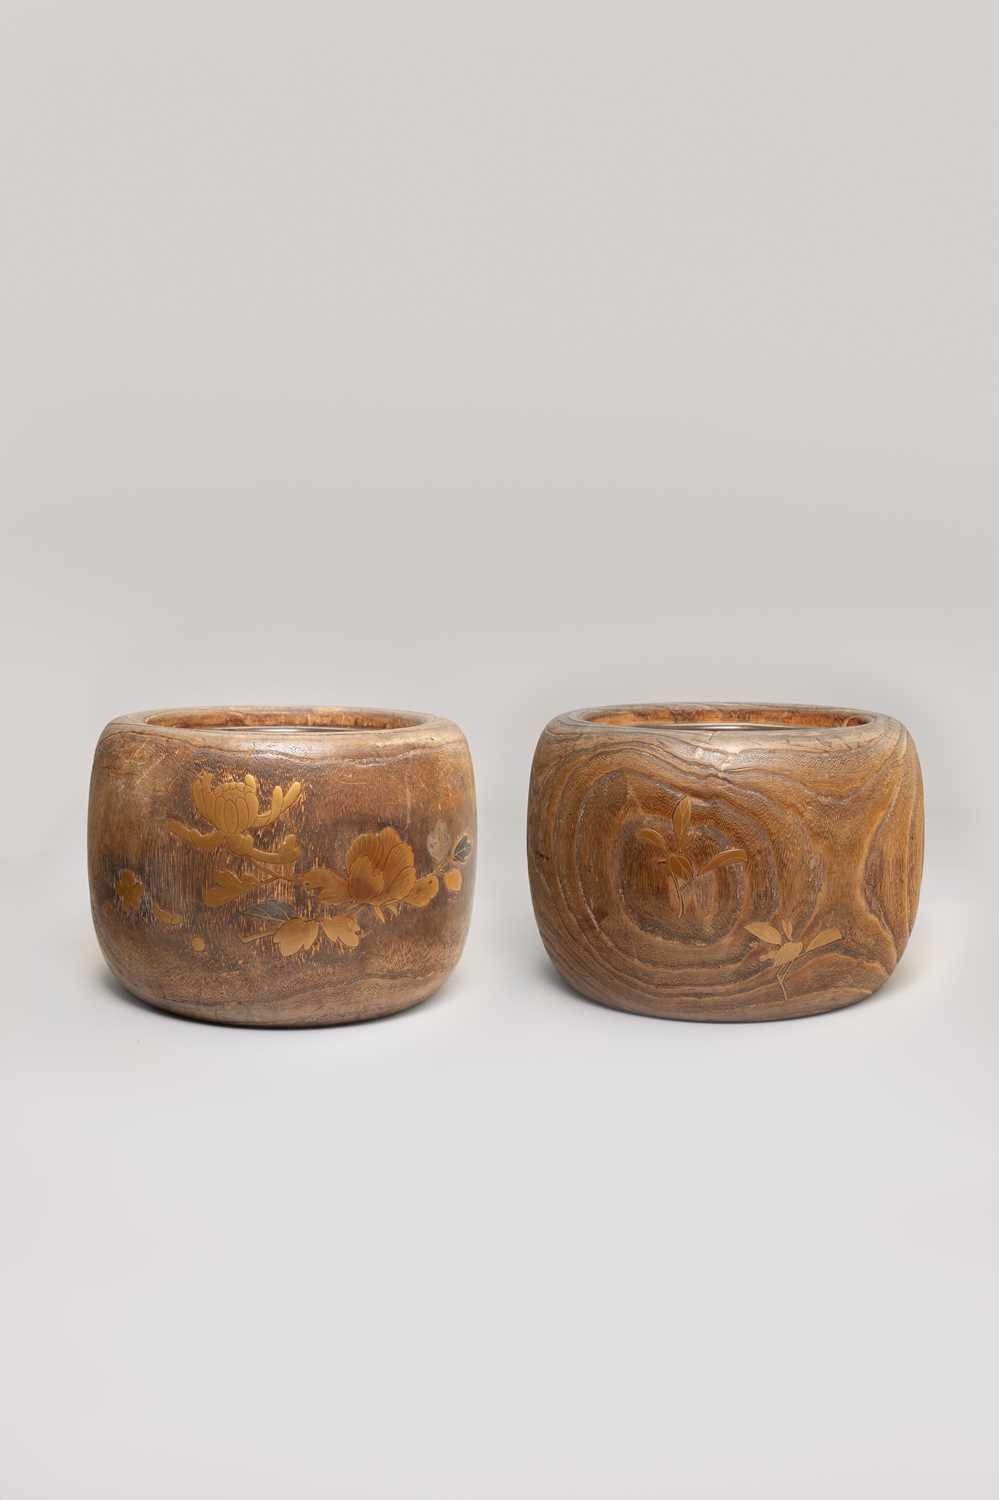 NO RESERVE A PAIR OF JAPANESE LACQUERED WOOD HIBACHI (BRAZIERS) MEIJI ERA, 19TH CENTURY The circular